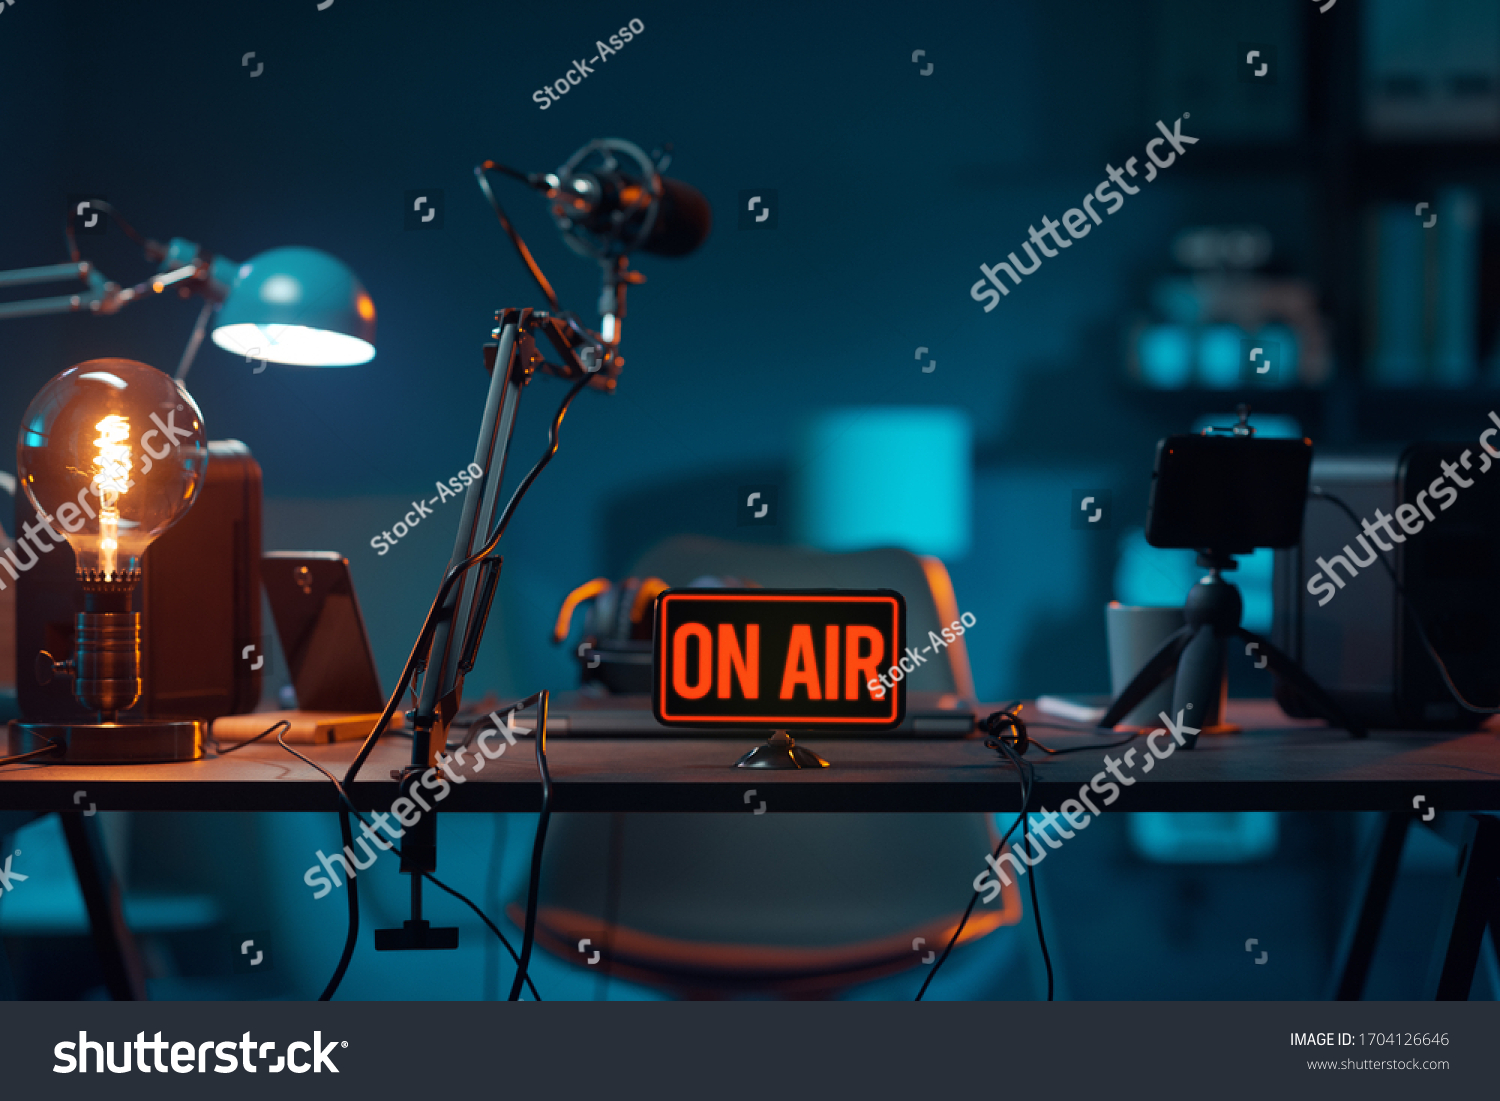 Live online radio studio desk with on air sign, entertainment and communication concept #1704126646